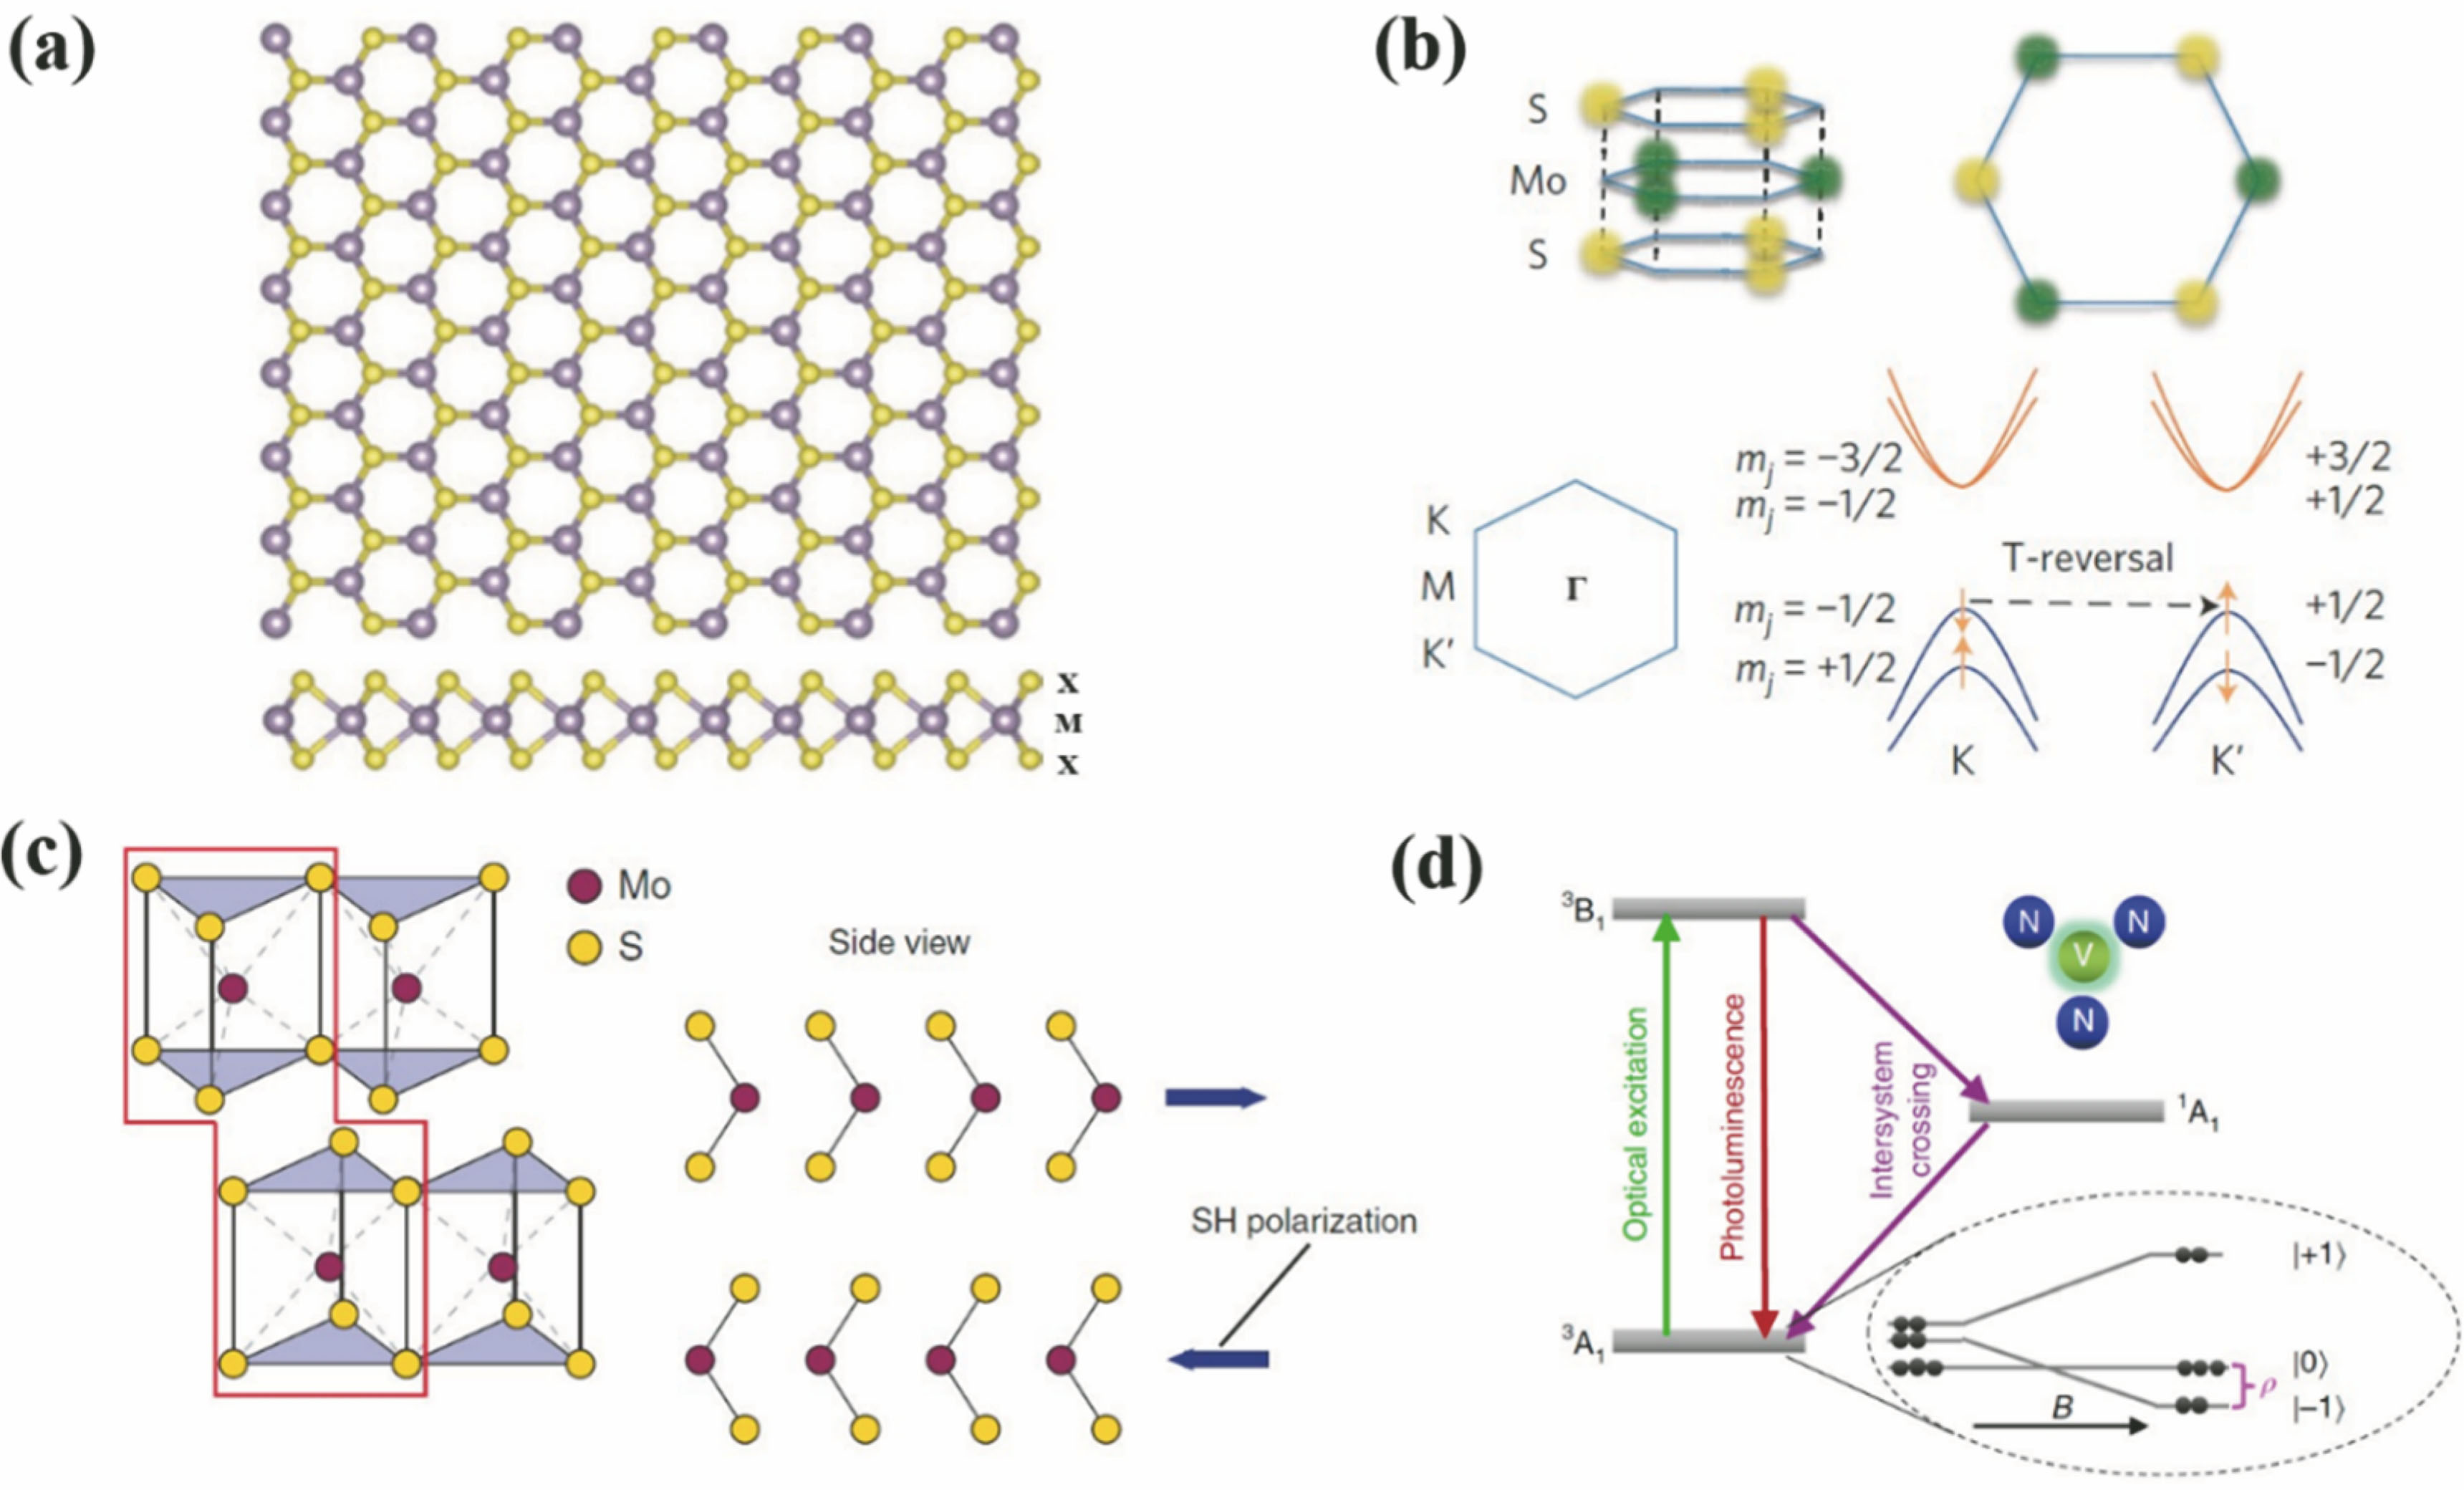 Schematics for some fundamental properties of 2D semiconductors. (a) Schematic of atomic structure of TMD MX2[13]; (b) upper: triangular prismatic structure and honeycomb lattice structure of monolayer MoS2; lower: hexagonal structure of valley band of degenerate states (K and K') and selection rule of valley band transition[36]; (c) 2H phase of monolayer TMD hexagonal lattice and SHG under symmetry breaking of spatial inversion[37]; (d) schematic of single photon properties of defect states in 2D materials[38]